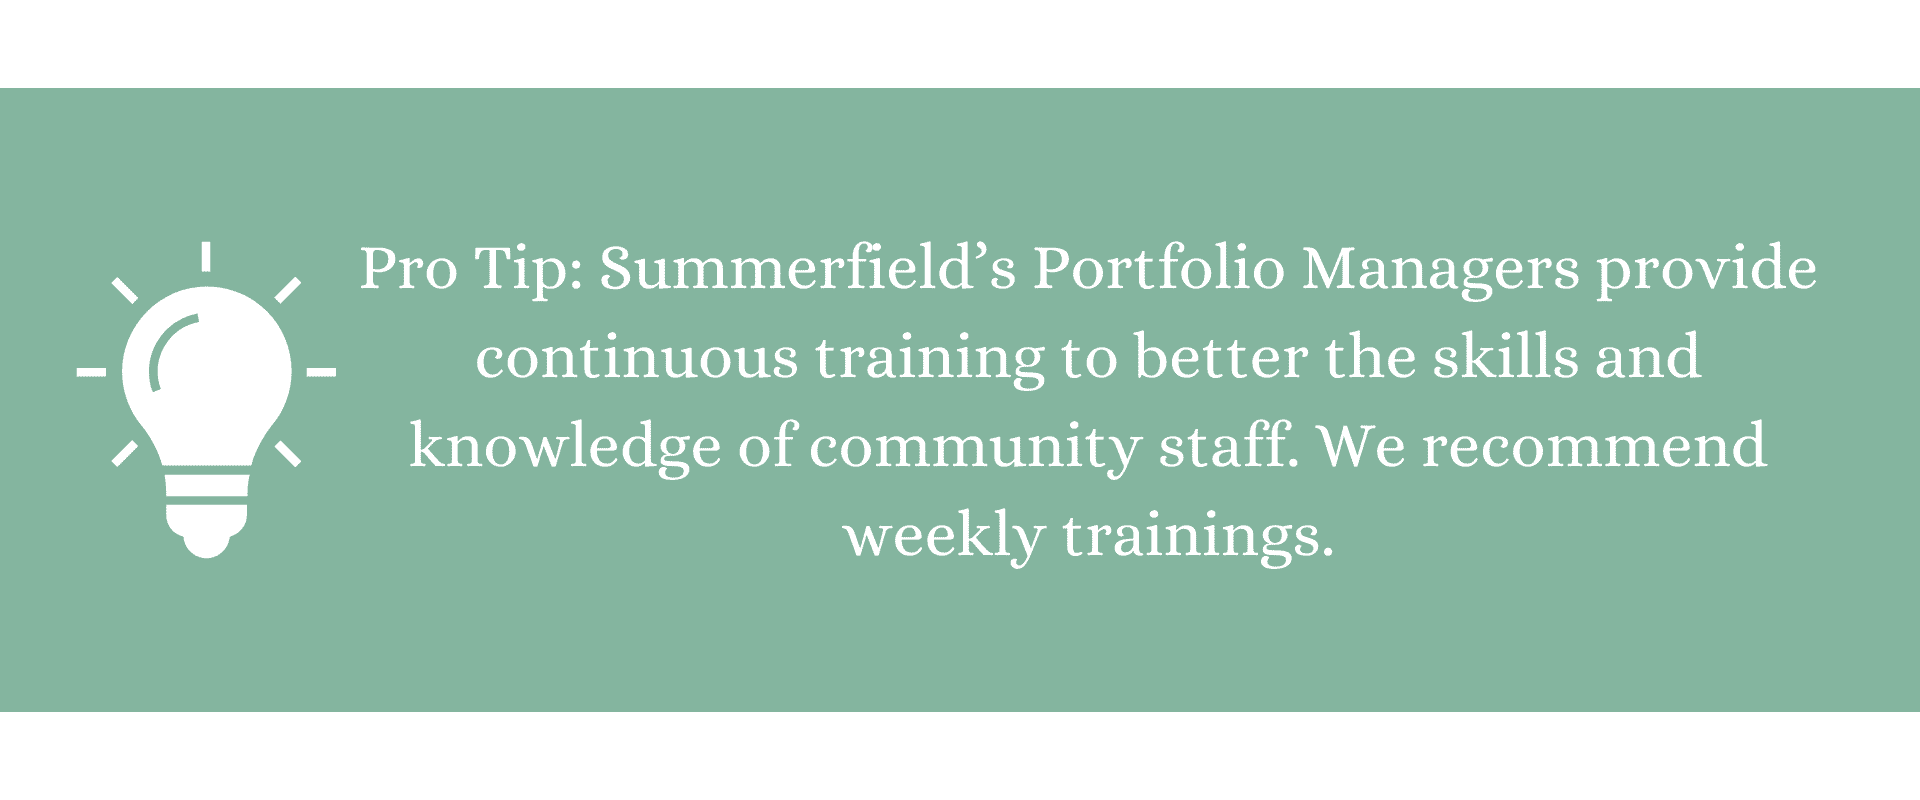 Pro Tip: Summerfield’s Portfolio Managers provide continuous training to better the skills and knowledge of community staff. We recommend weekly trainings.